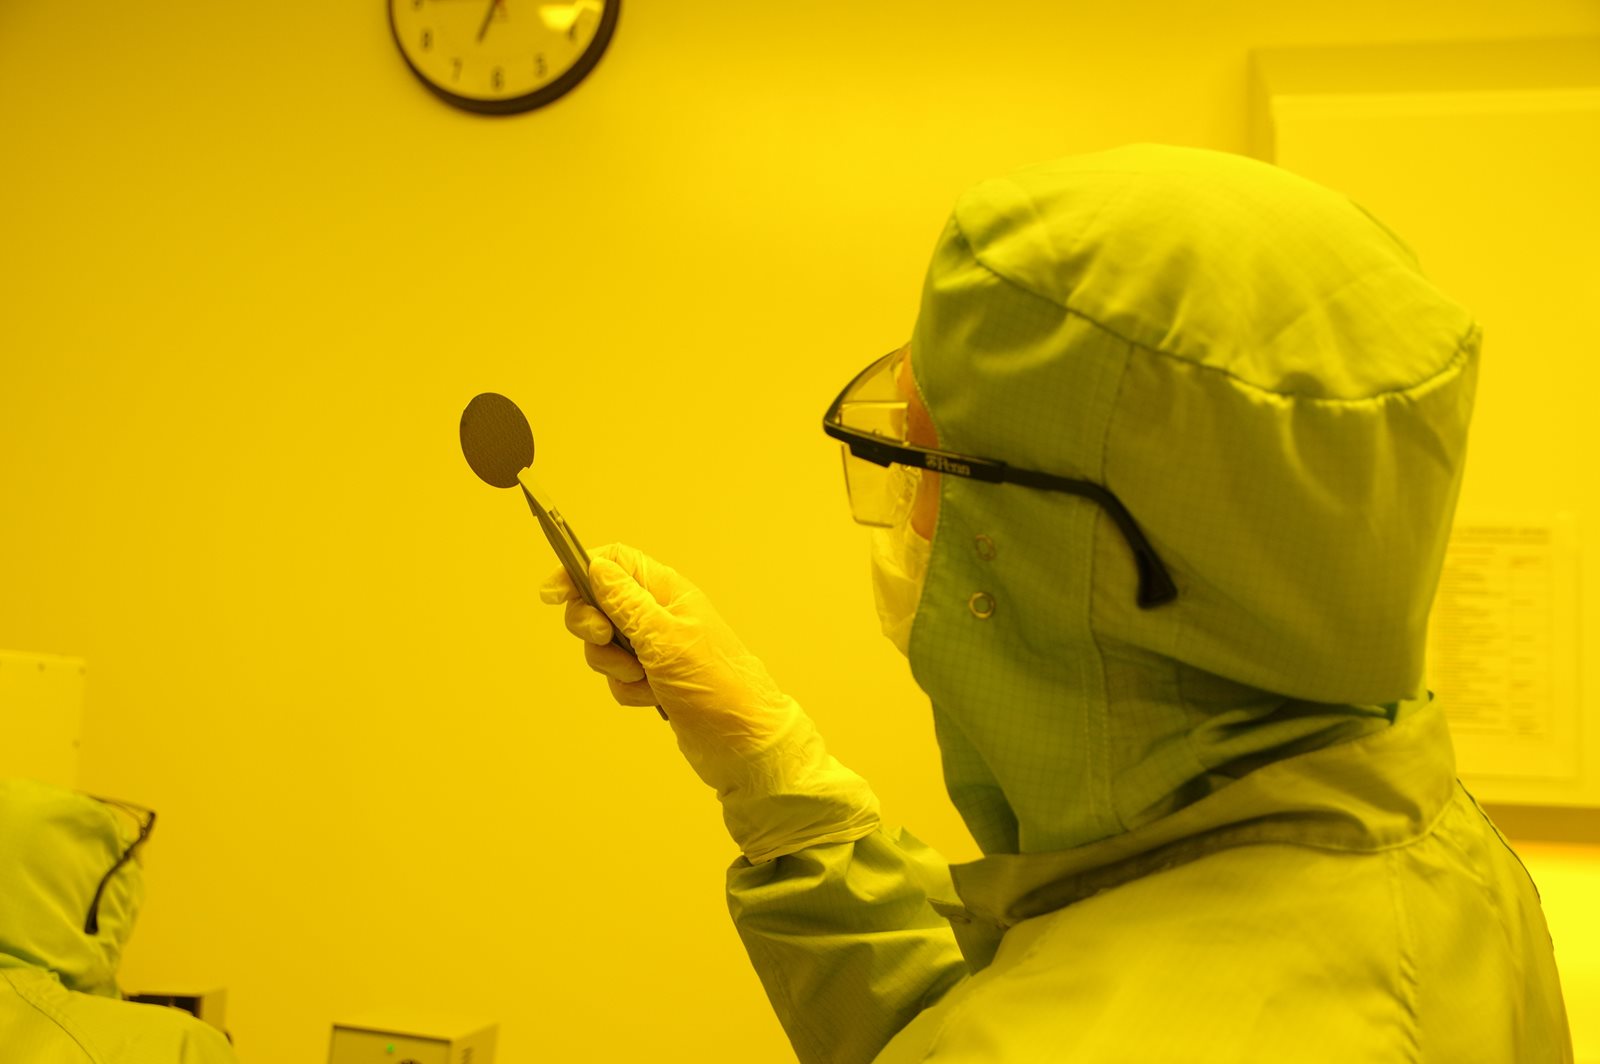 Examining silicon wafer in clean room